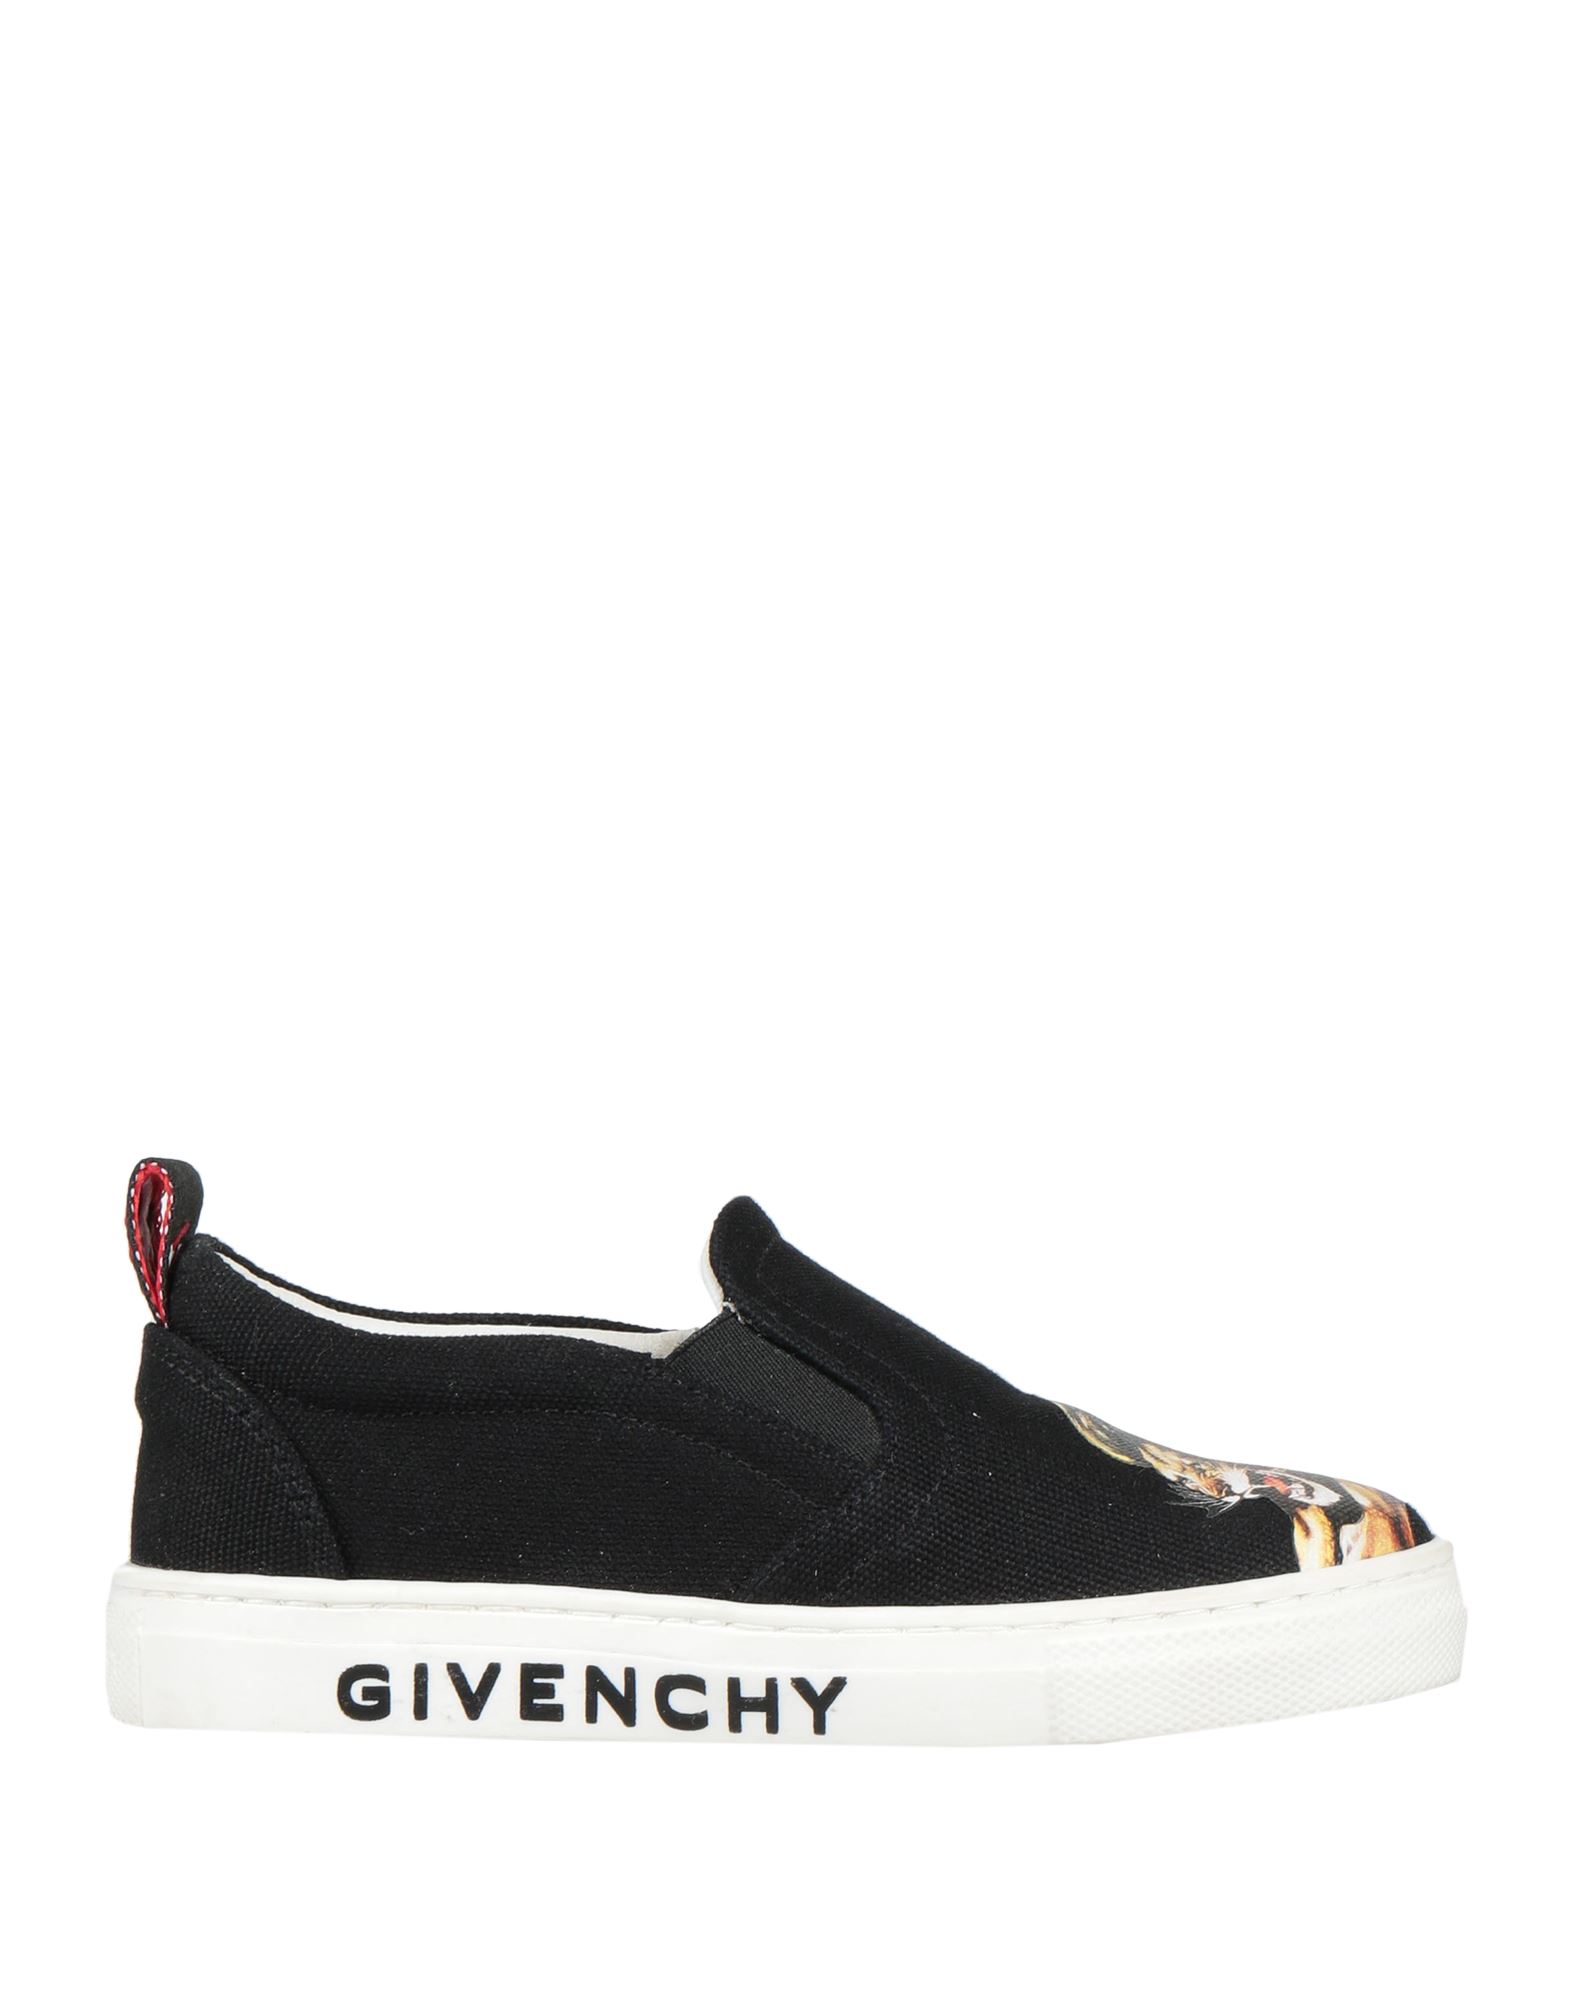 GIVENCHY Shoes for Boys | ModeSens